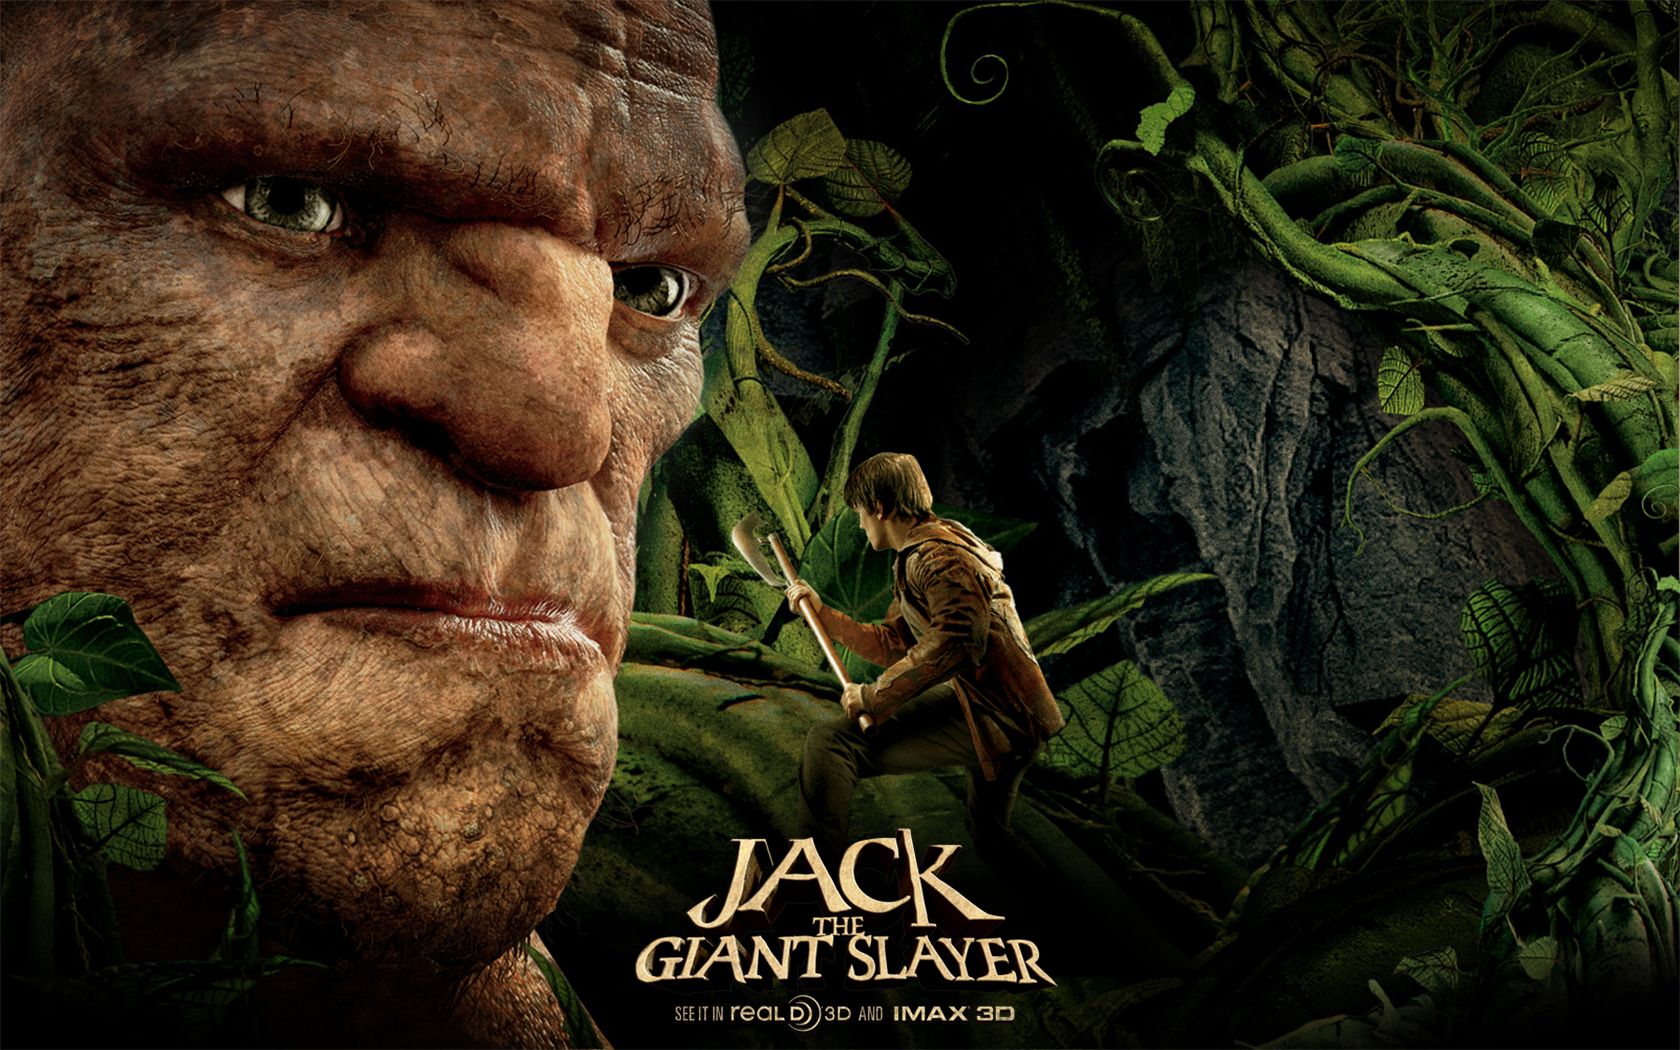 Jack the Giant Slayer Movie Poster wallpaper. Jack the Giant